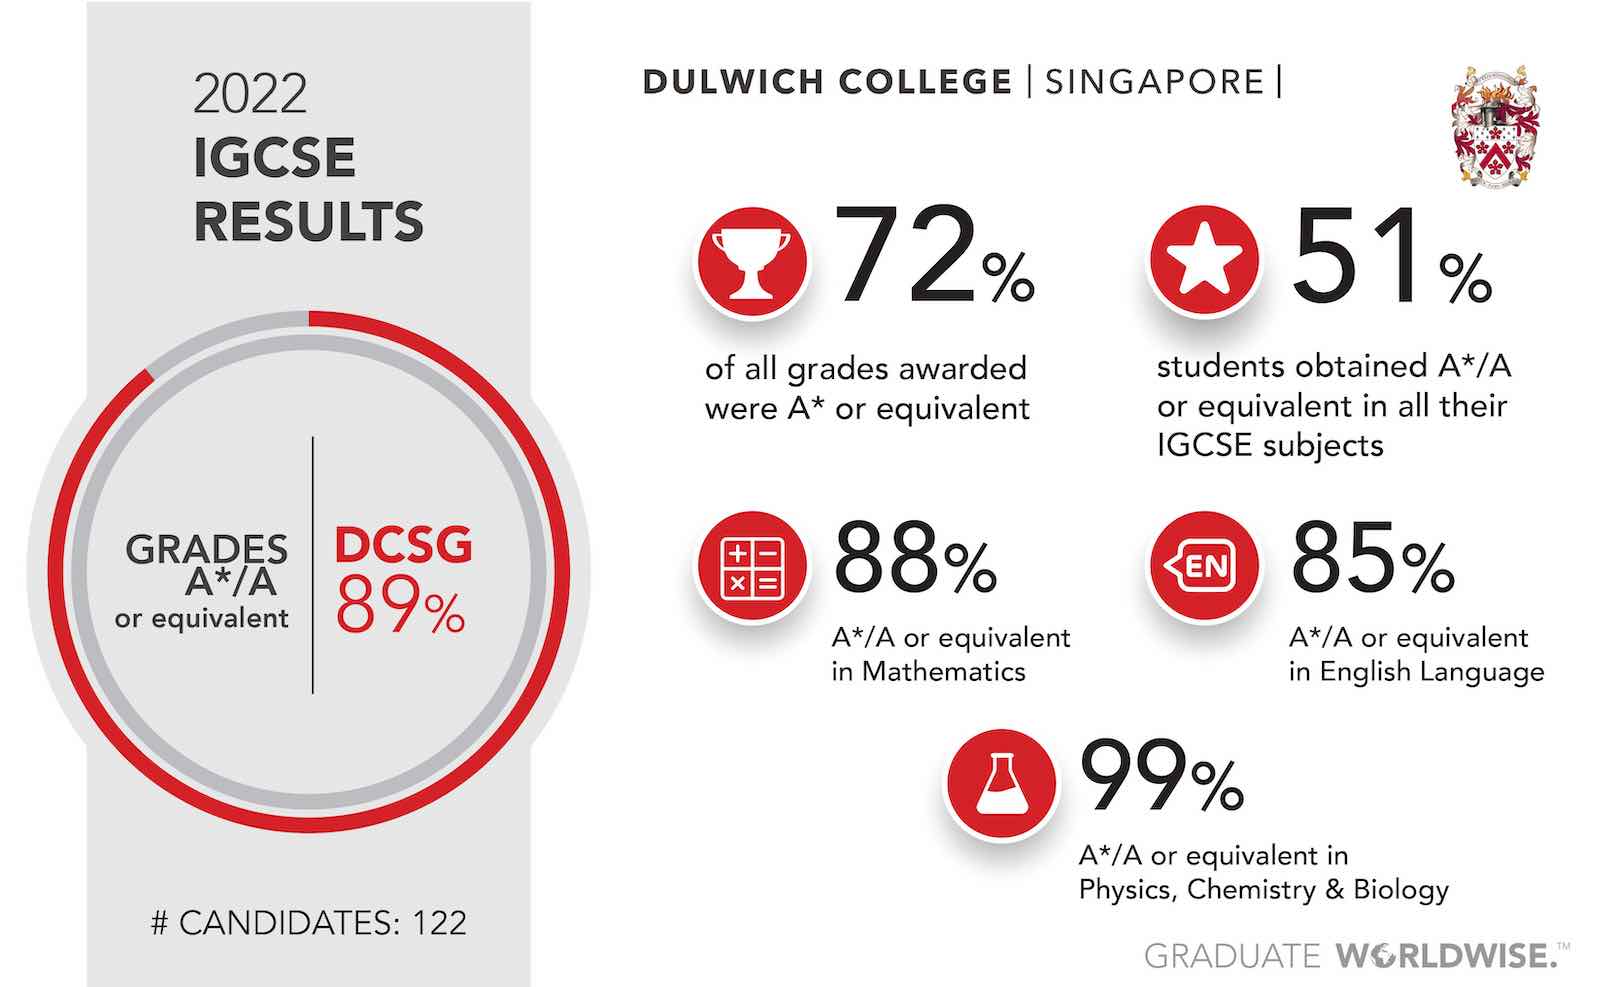 Dulwich College Singapore Results 2022